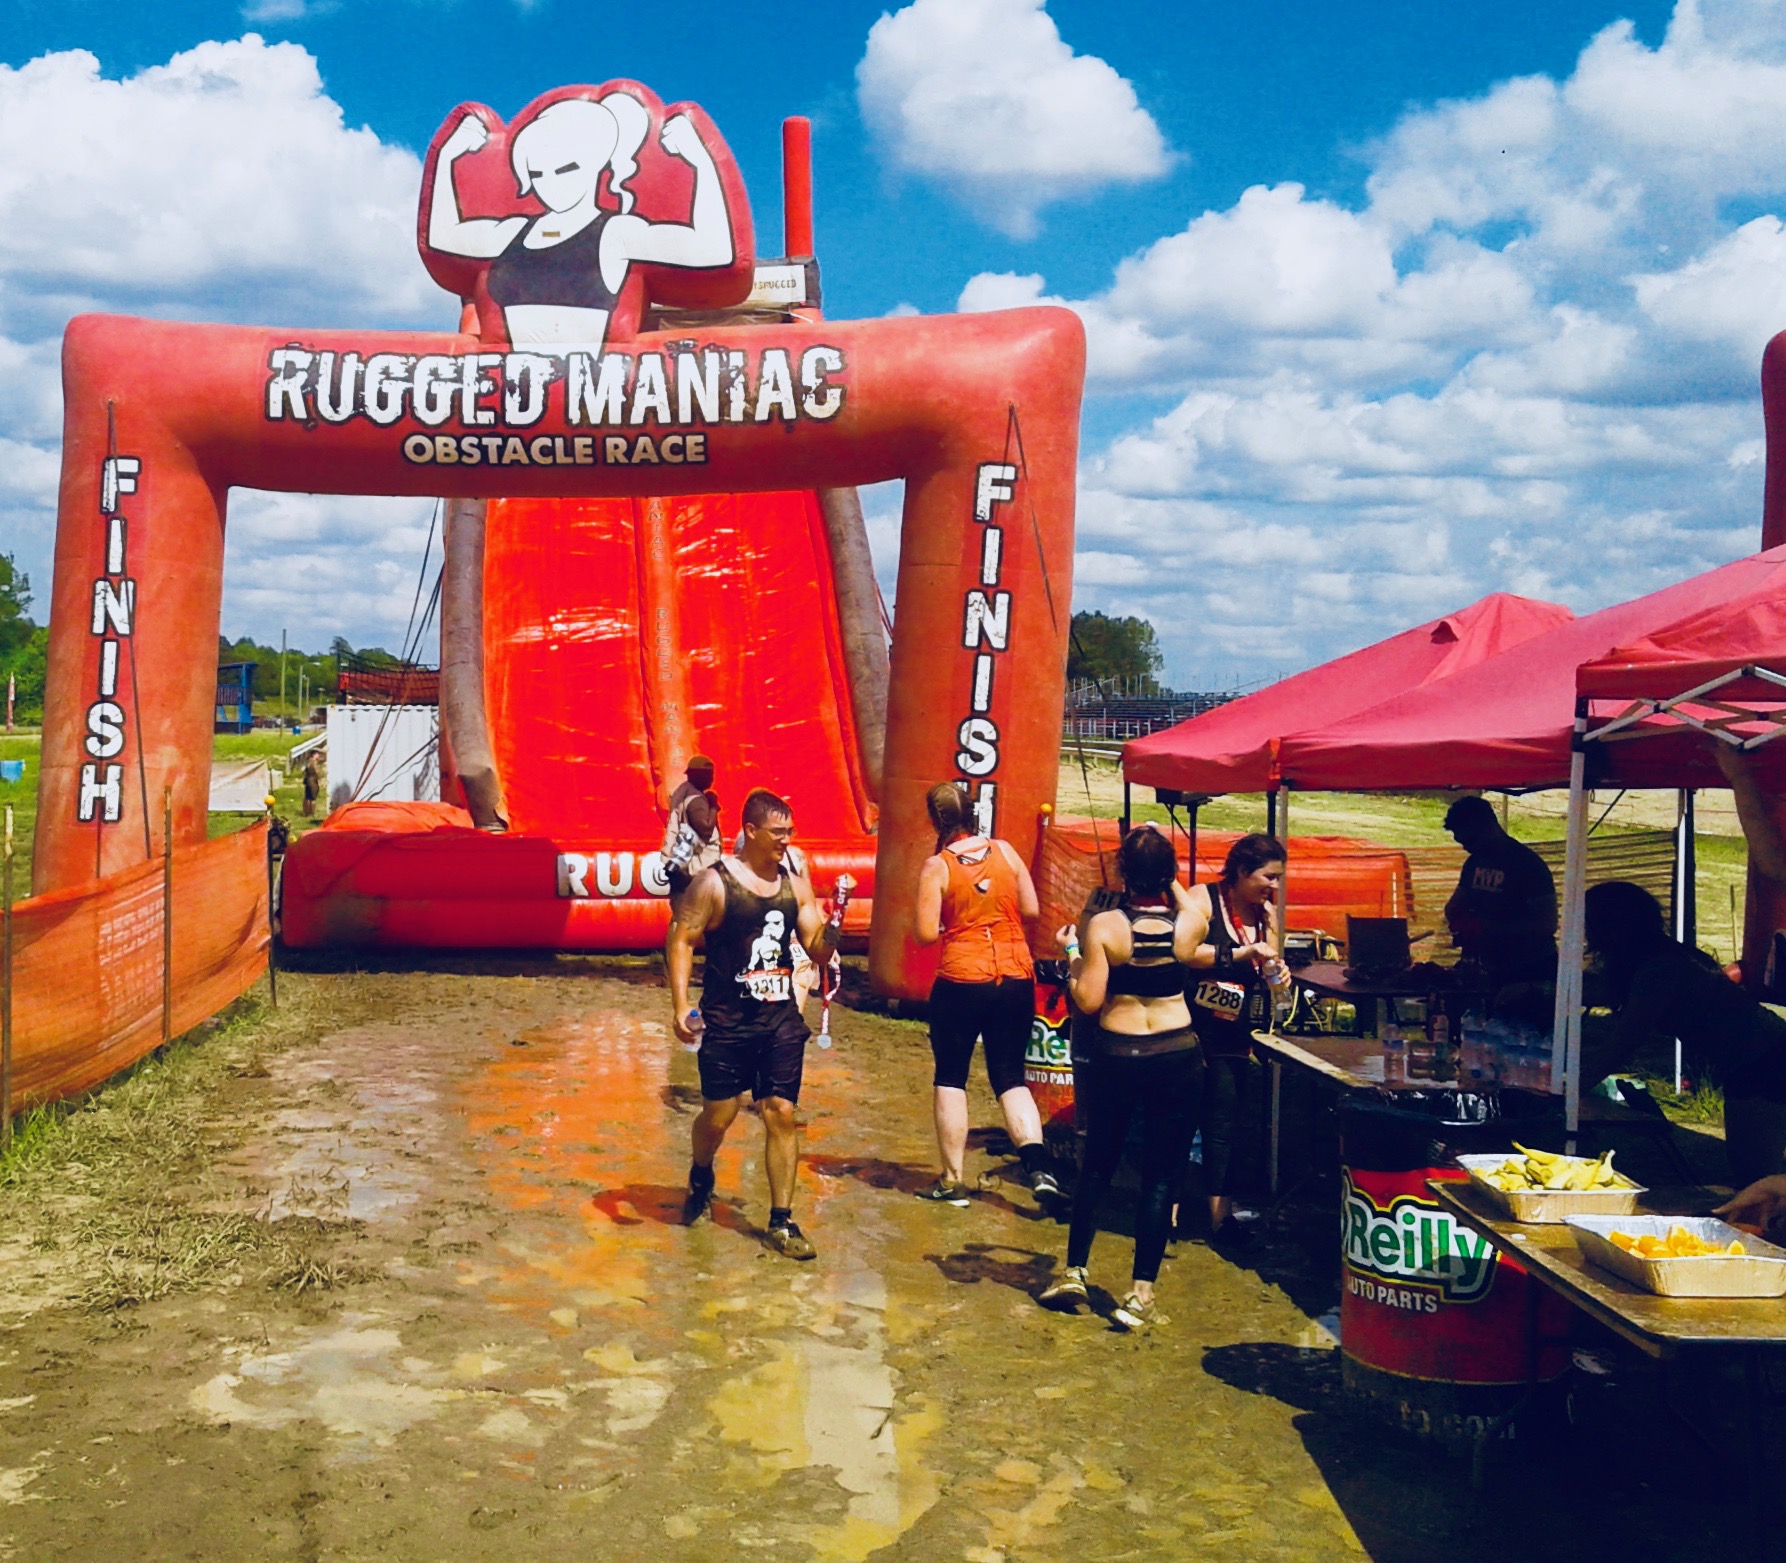 Six New Rugged Maniac Obstacles For 2019 This Old Runner